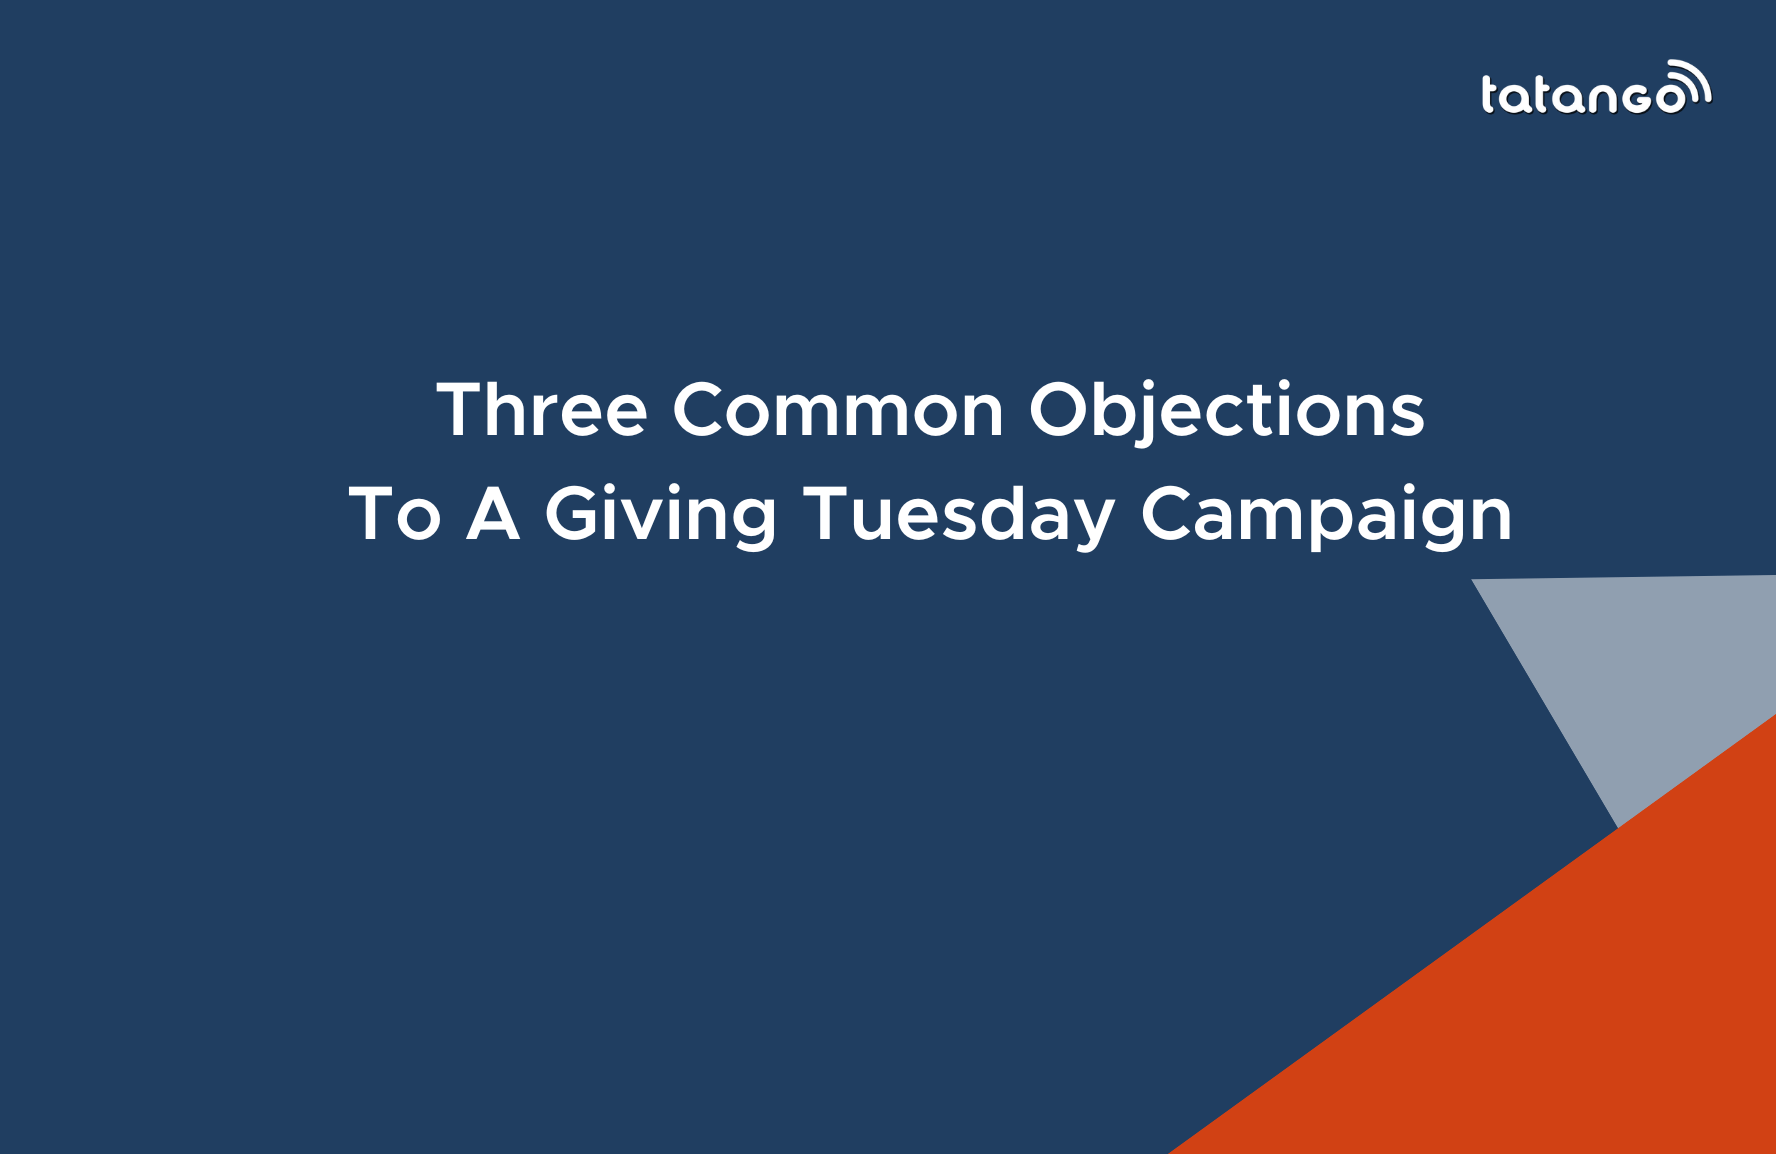 Three Common Objections to a Giving Tuesday Campaign